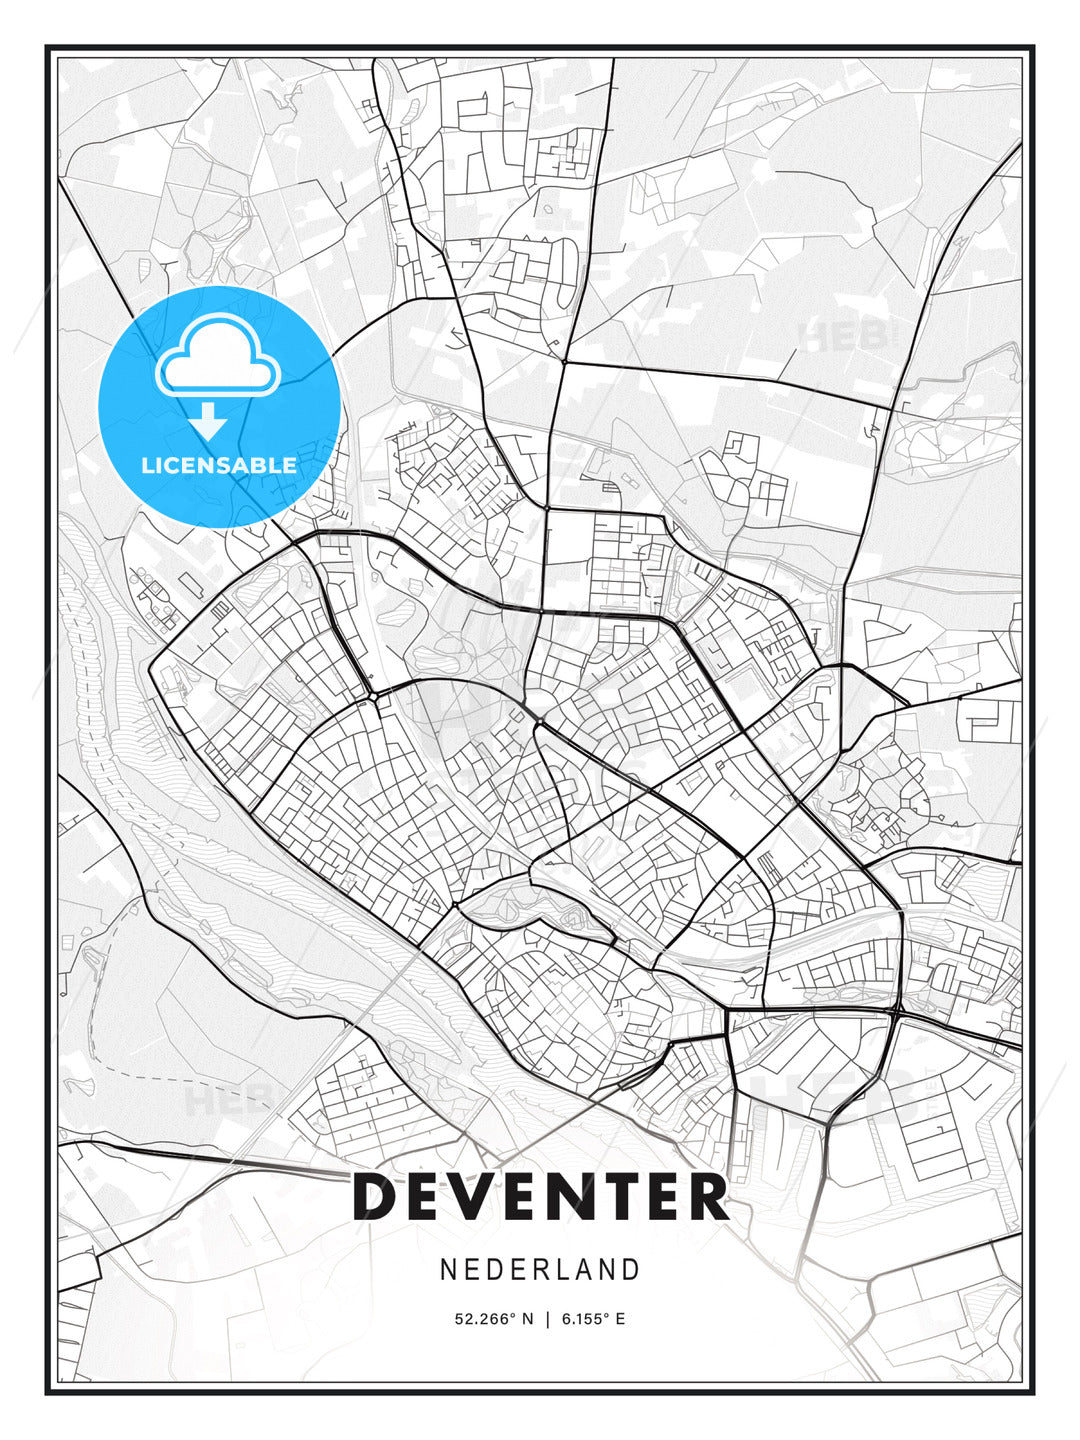 Deventer, Netherlands, Modern Print Template in Various Formats - HEBSTREITS Sketches